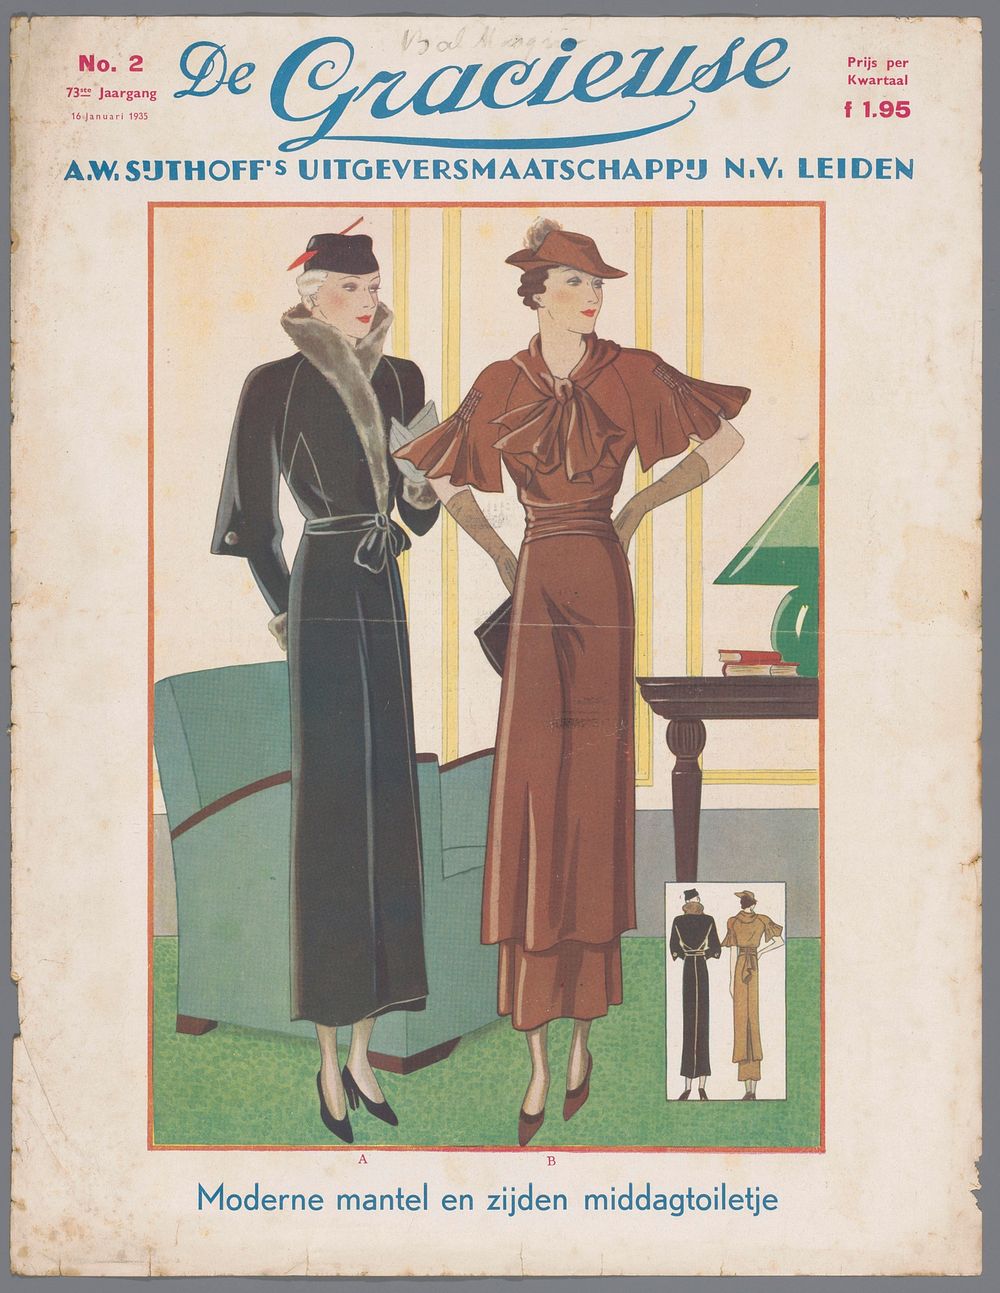 The Fashion Magazine as Temptress (1935) by anonymous and Albertus Willem Sijthoff